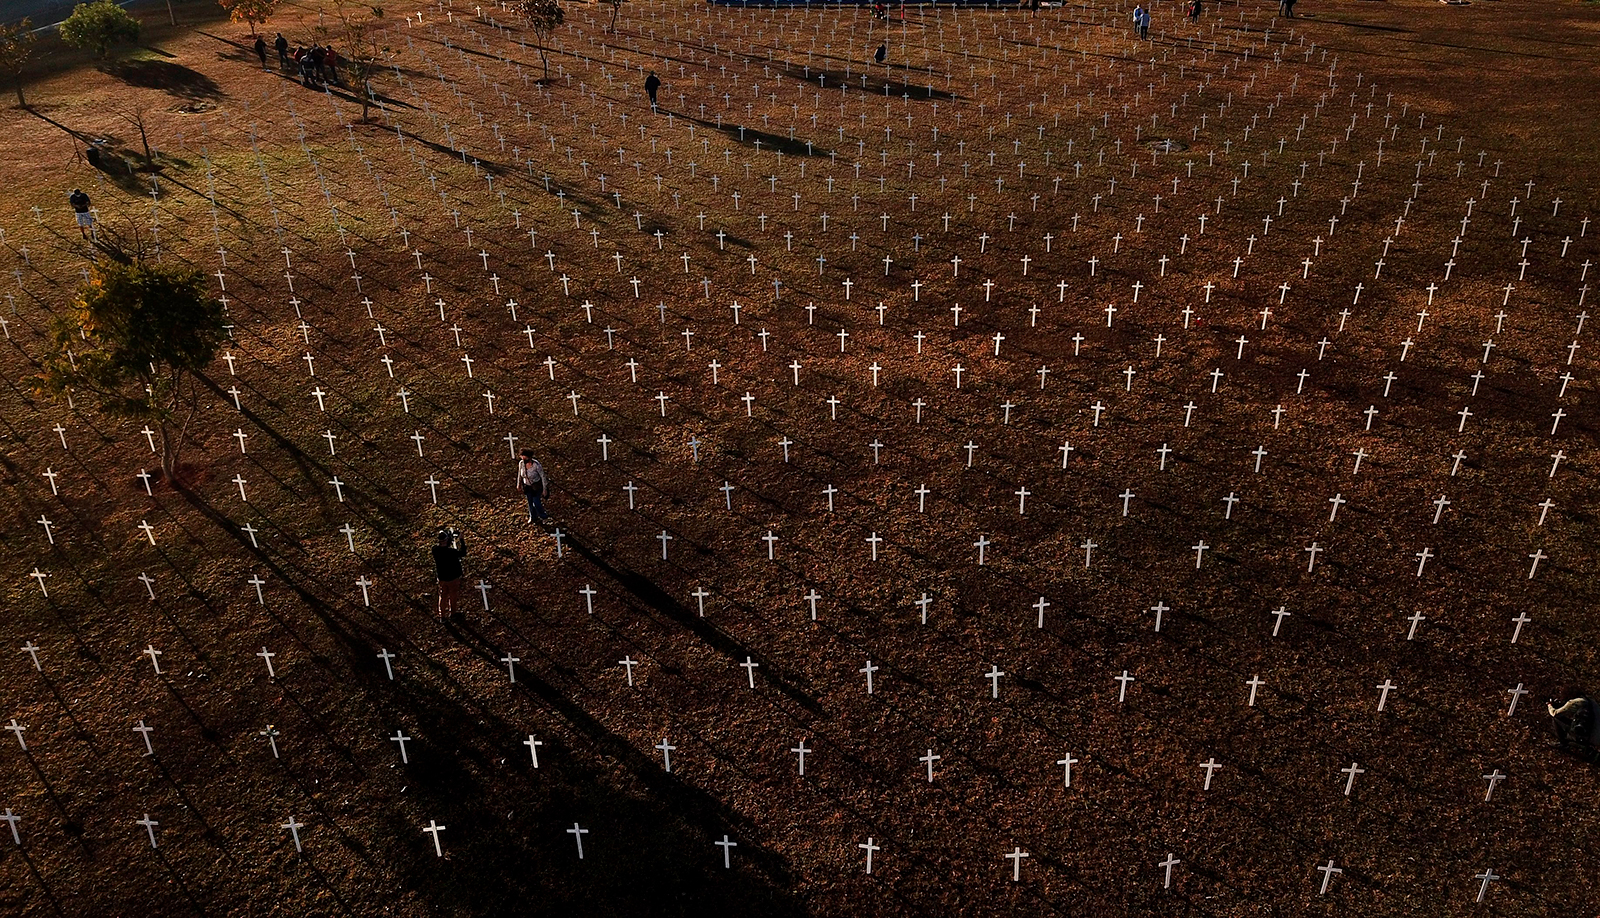 A thousand crosses were placed in front of the National Congress in Brasilia in honor of those who have died of Covid-19, on June 28, amid the novel coronavirus pandemic.